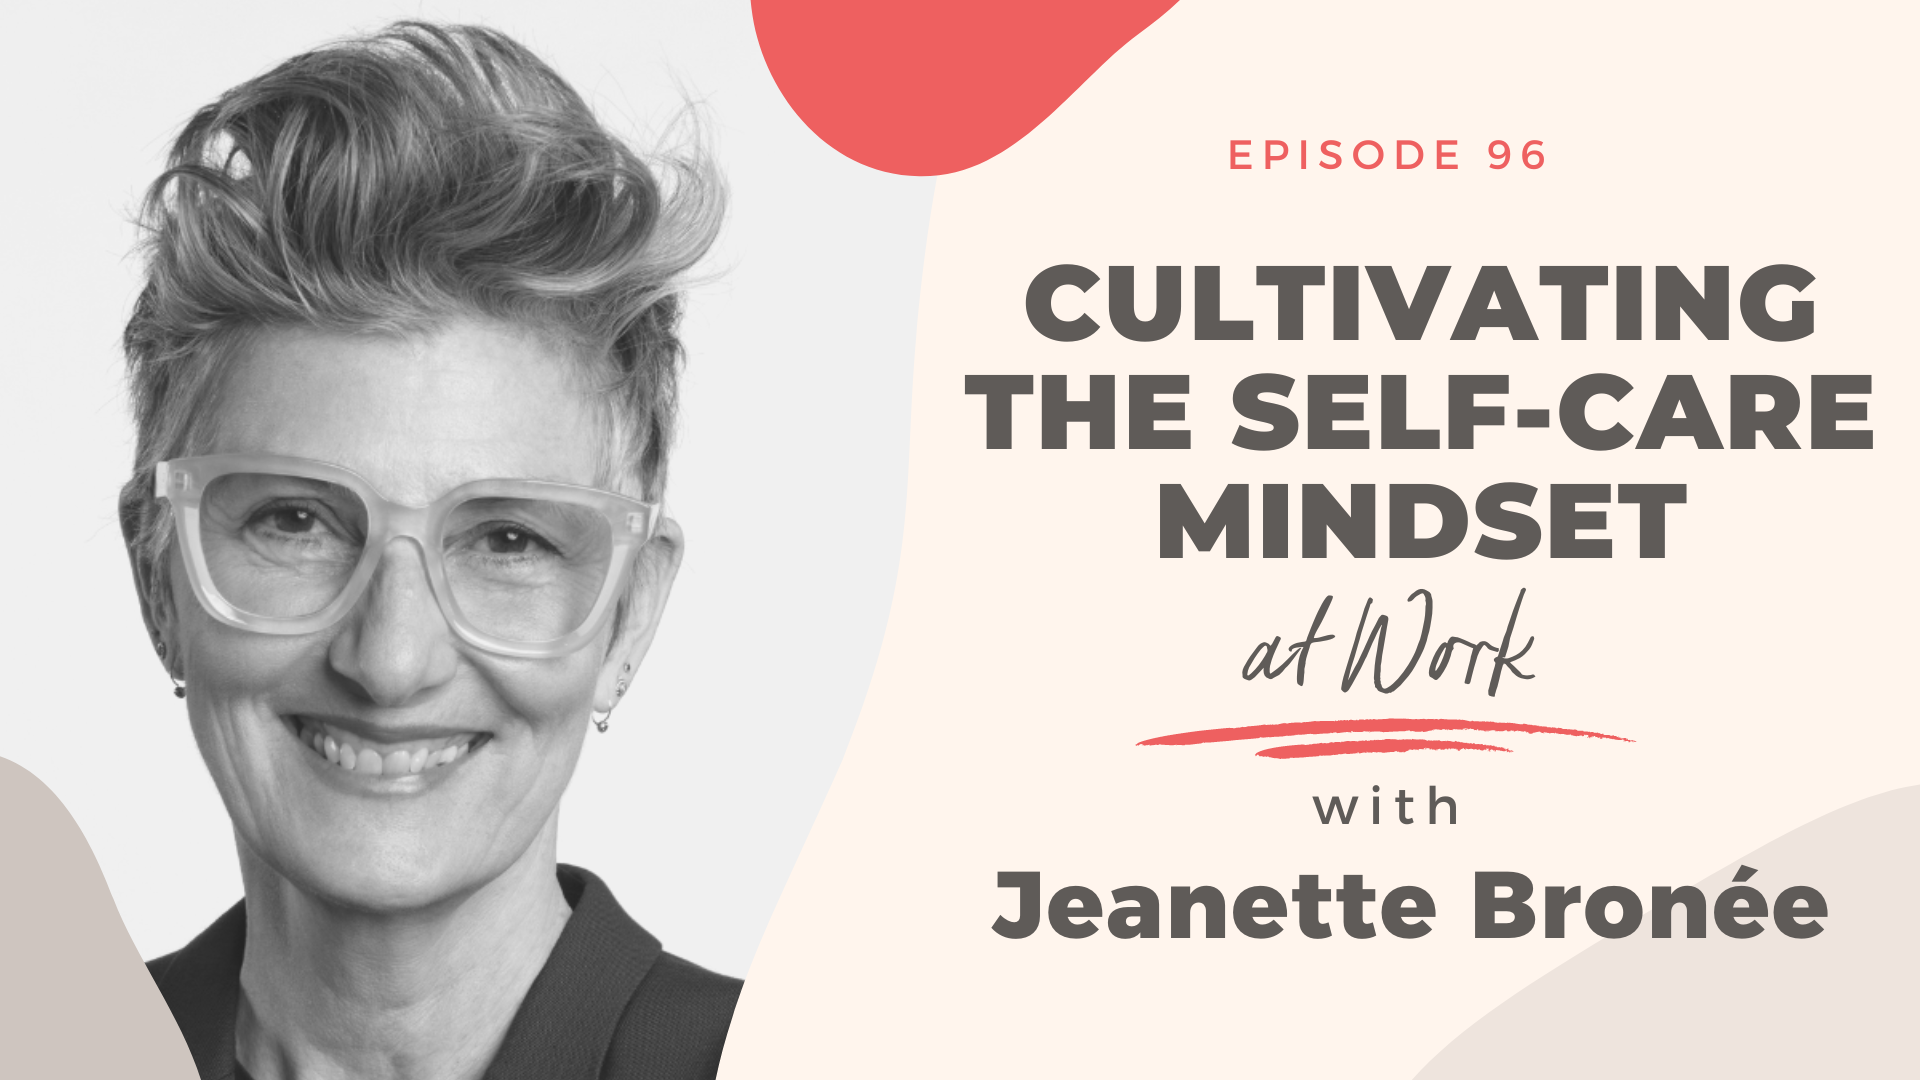 Cultivating the Self-Care Mindset at Work